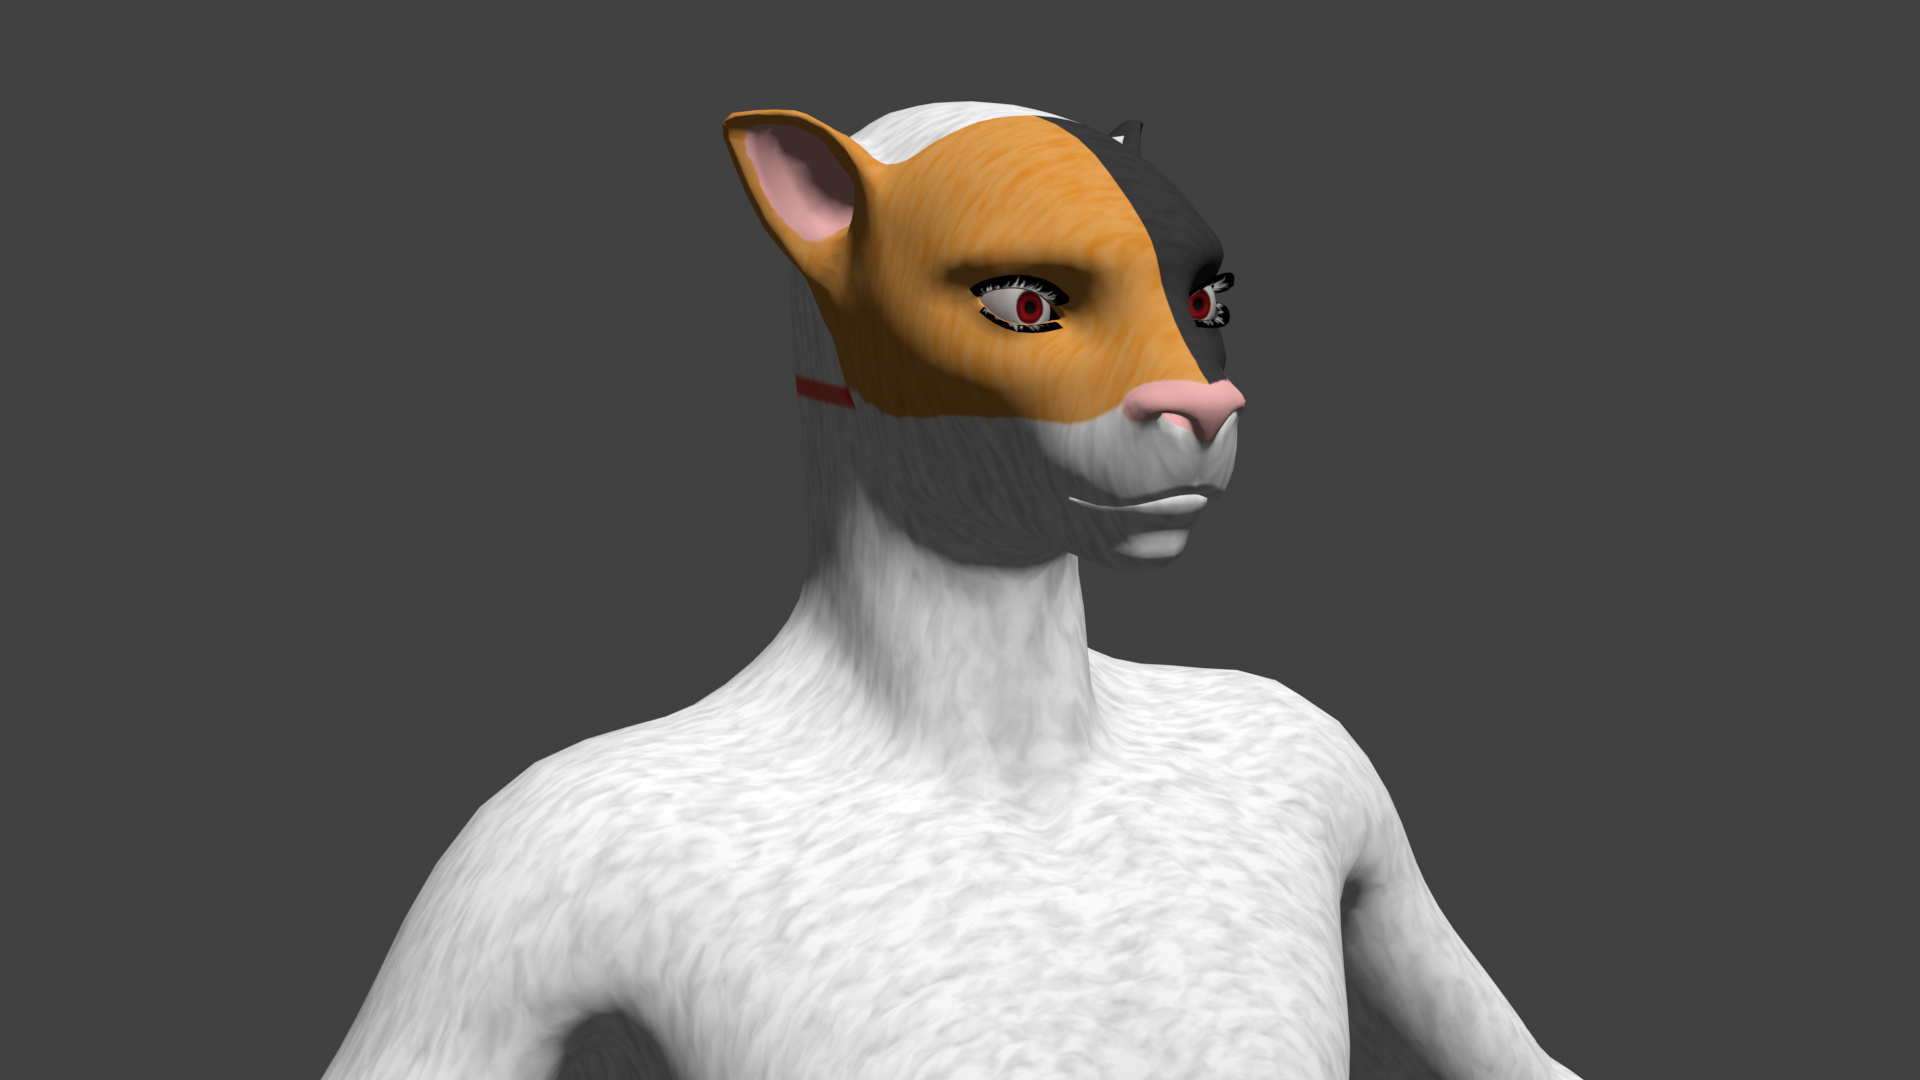 Generating a fur or fur like material - Materials and Textures ...